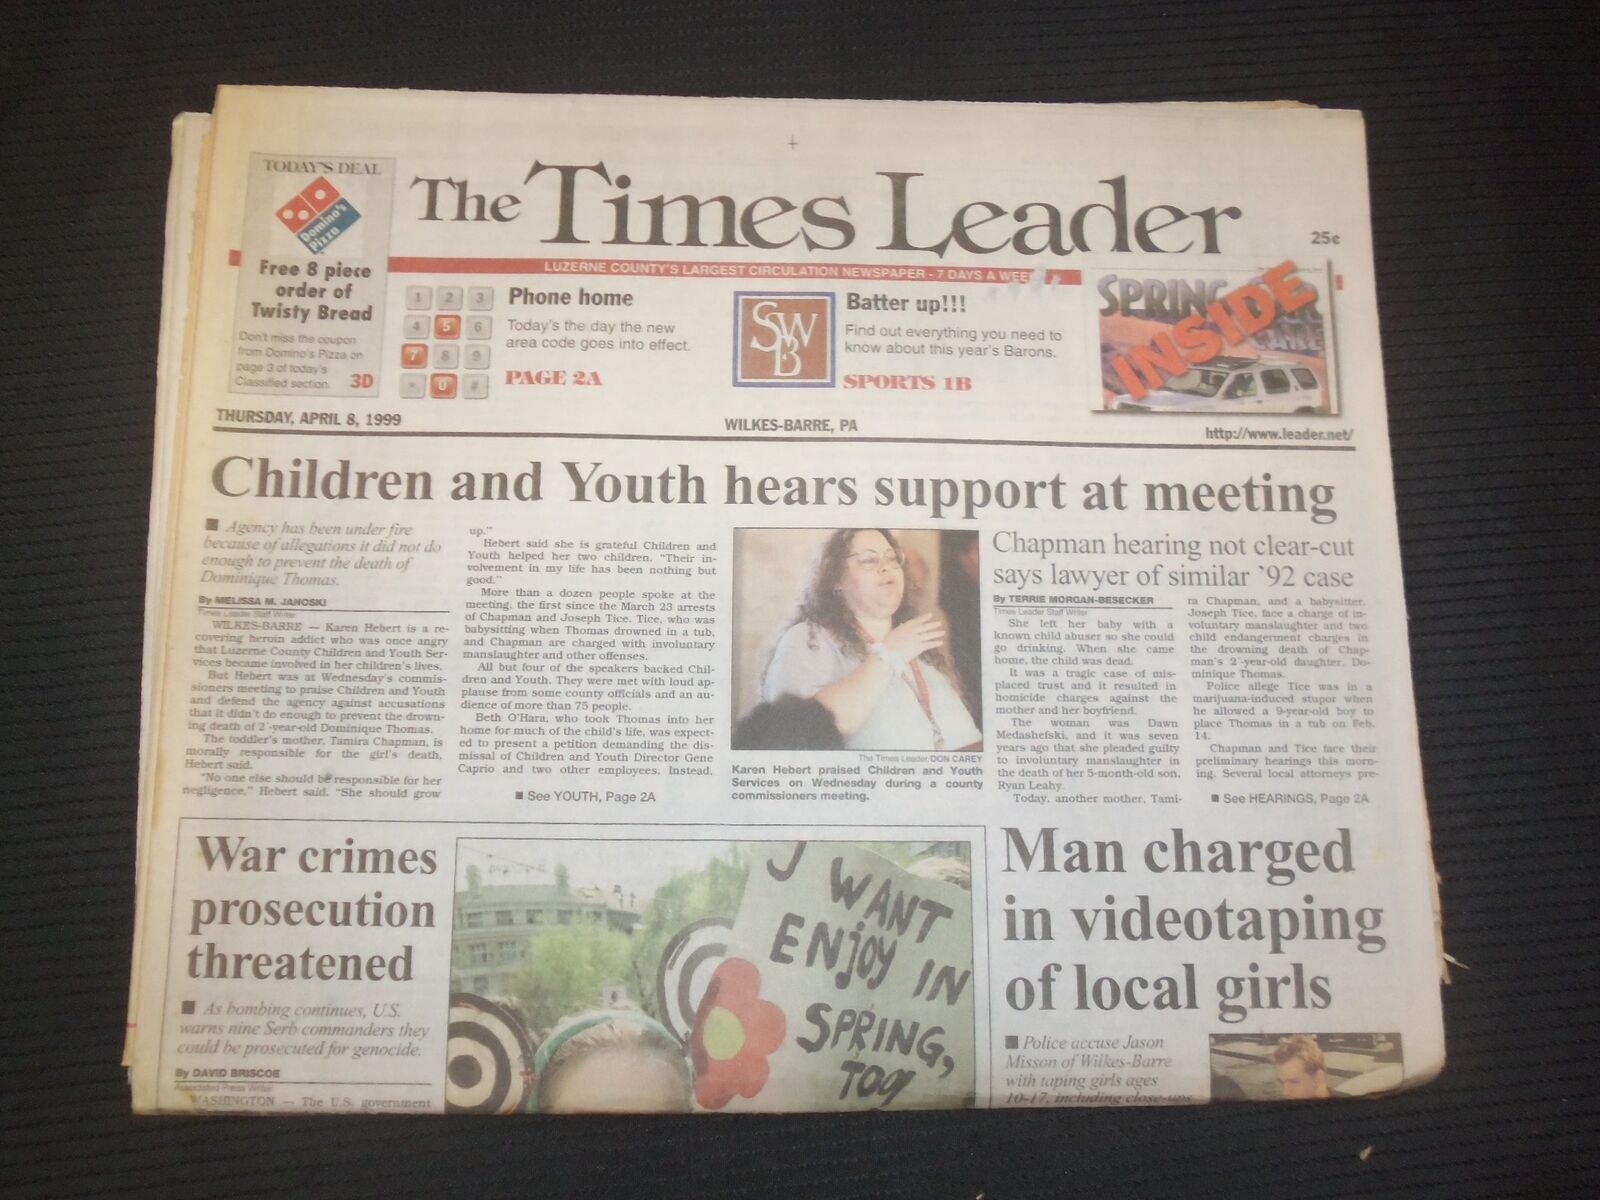 1999 APRIL 8 WILKES-BARRE TIMES LEADER - MAN VIDEOTAPED LOCAL GIRLS - NP 7480